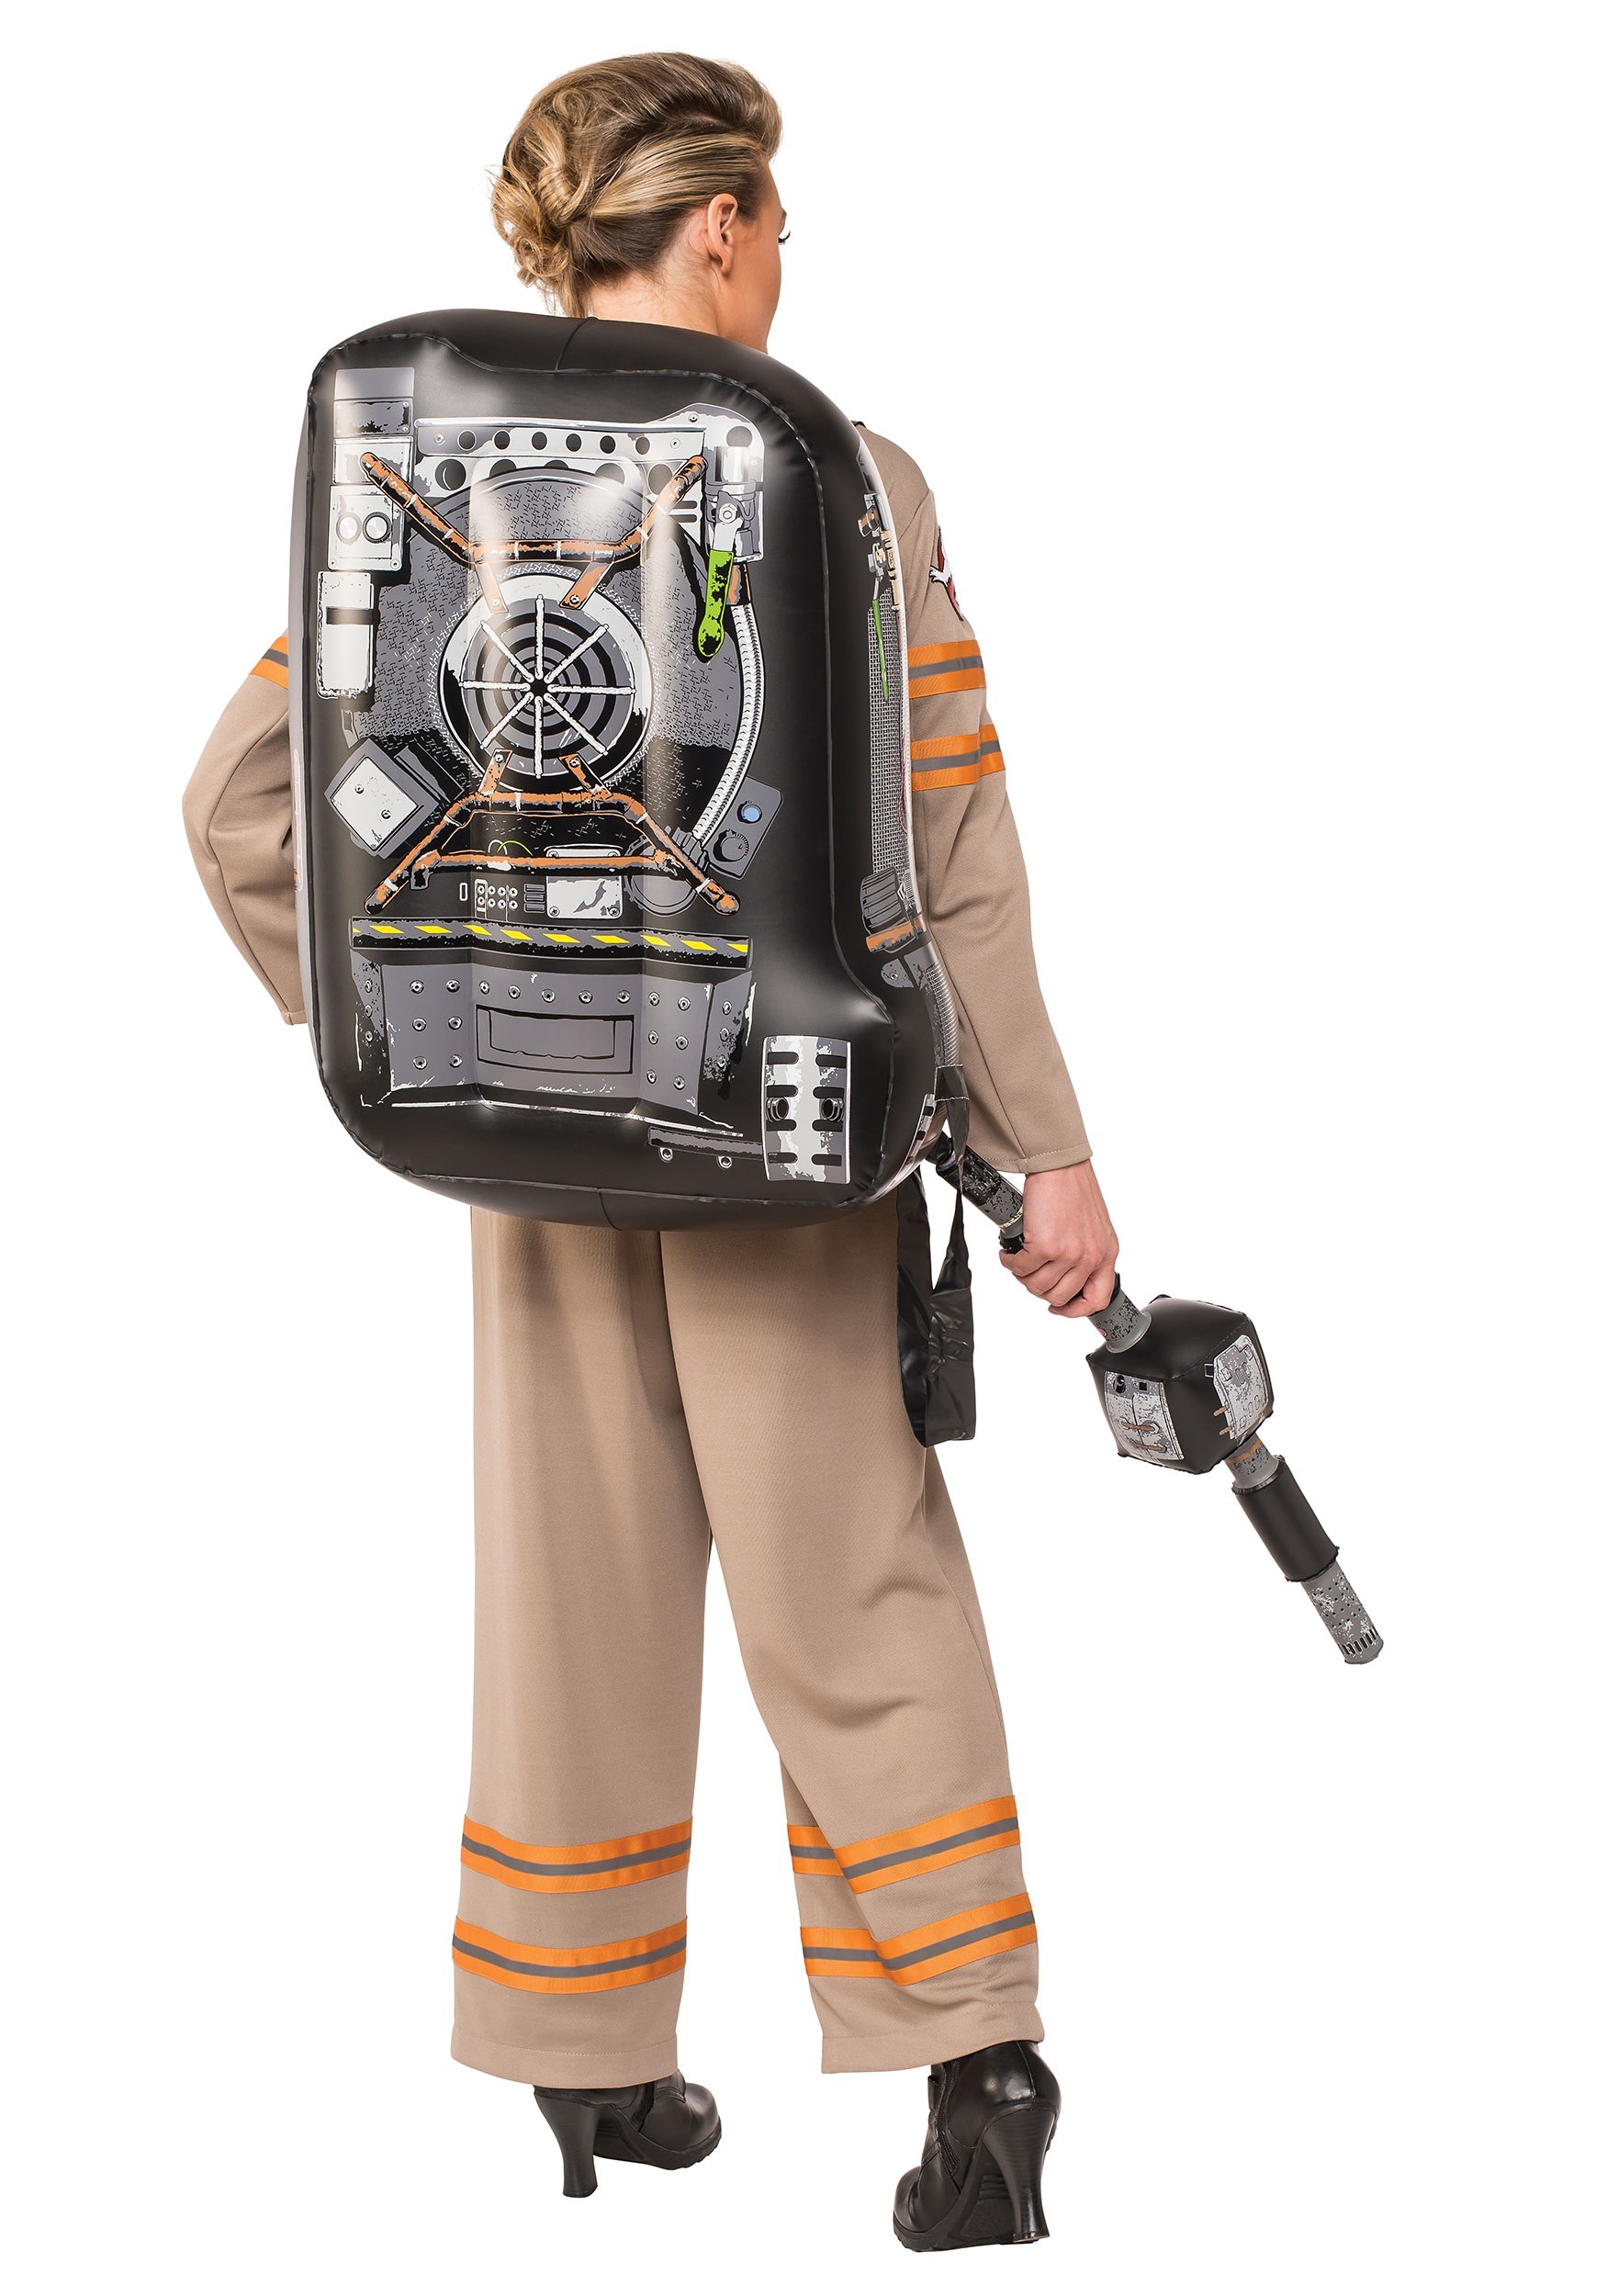 ghostbusters costume womens plus size